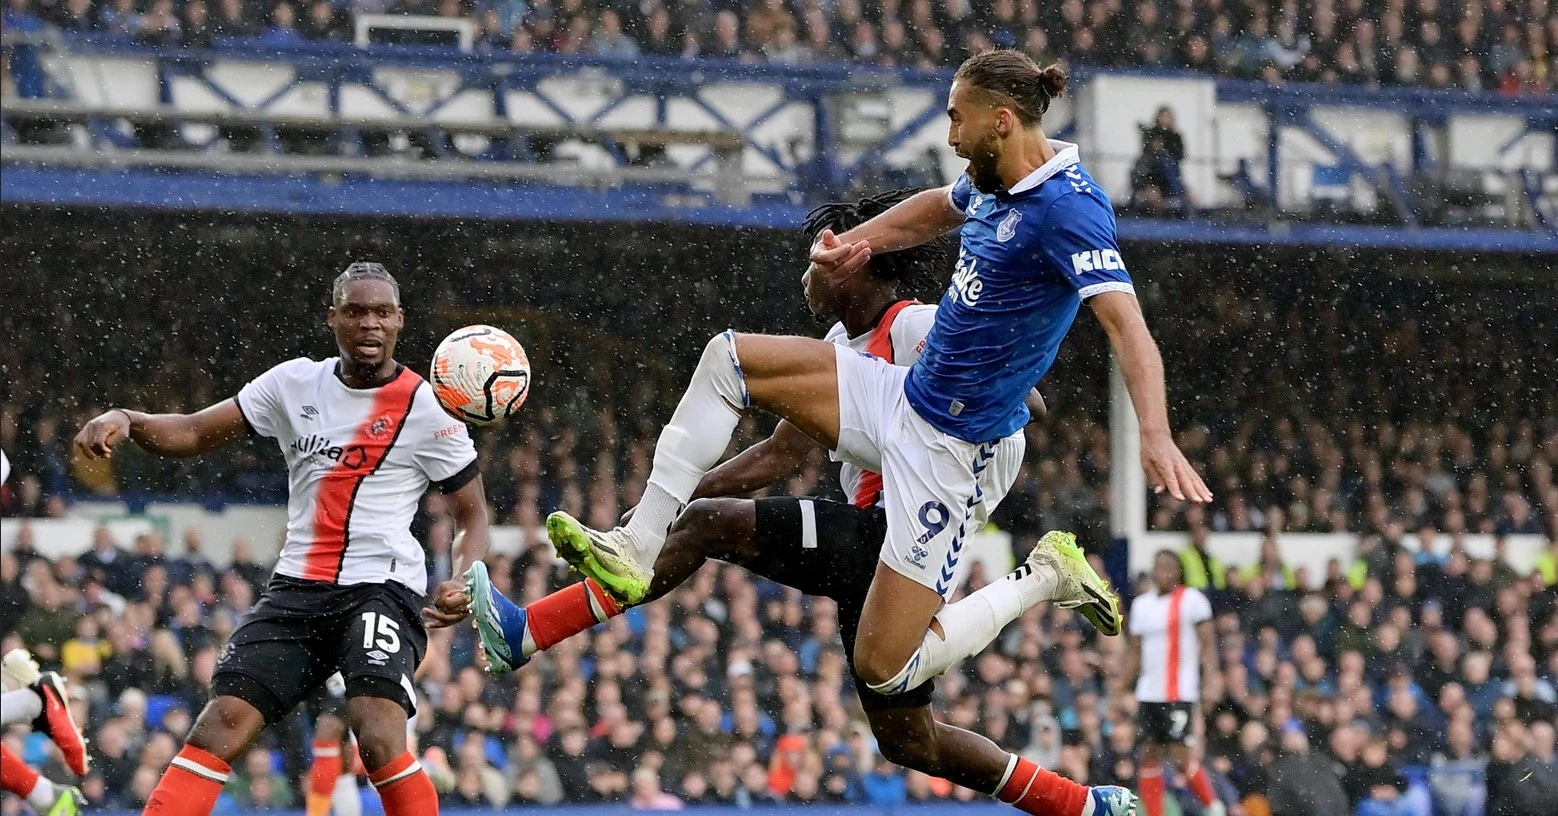 Pundit claims that Everton player’s defensive lapse cost Dyche in Luton Town defeat